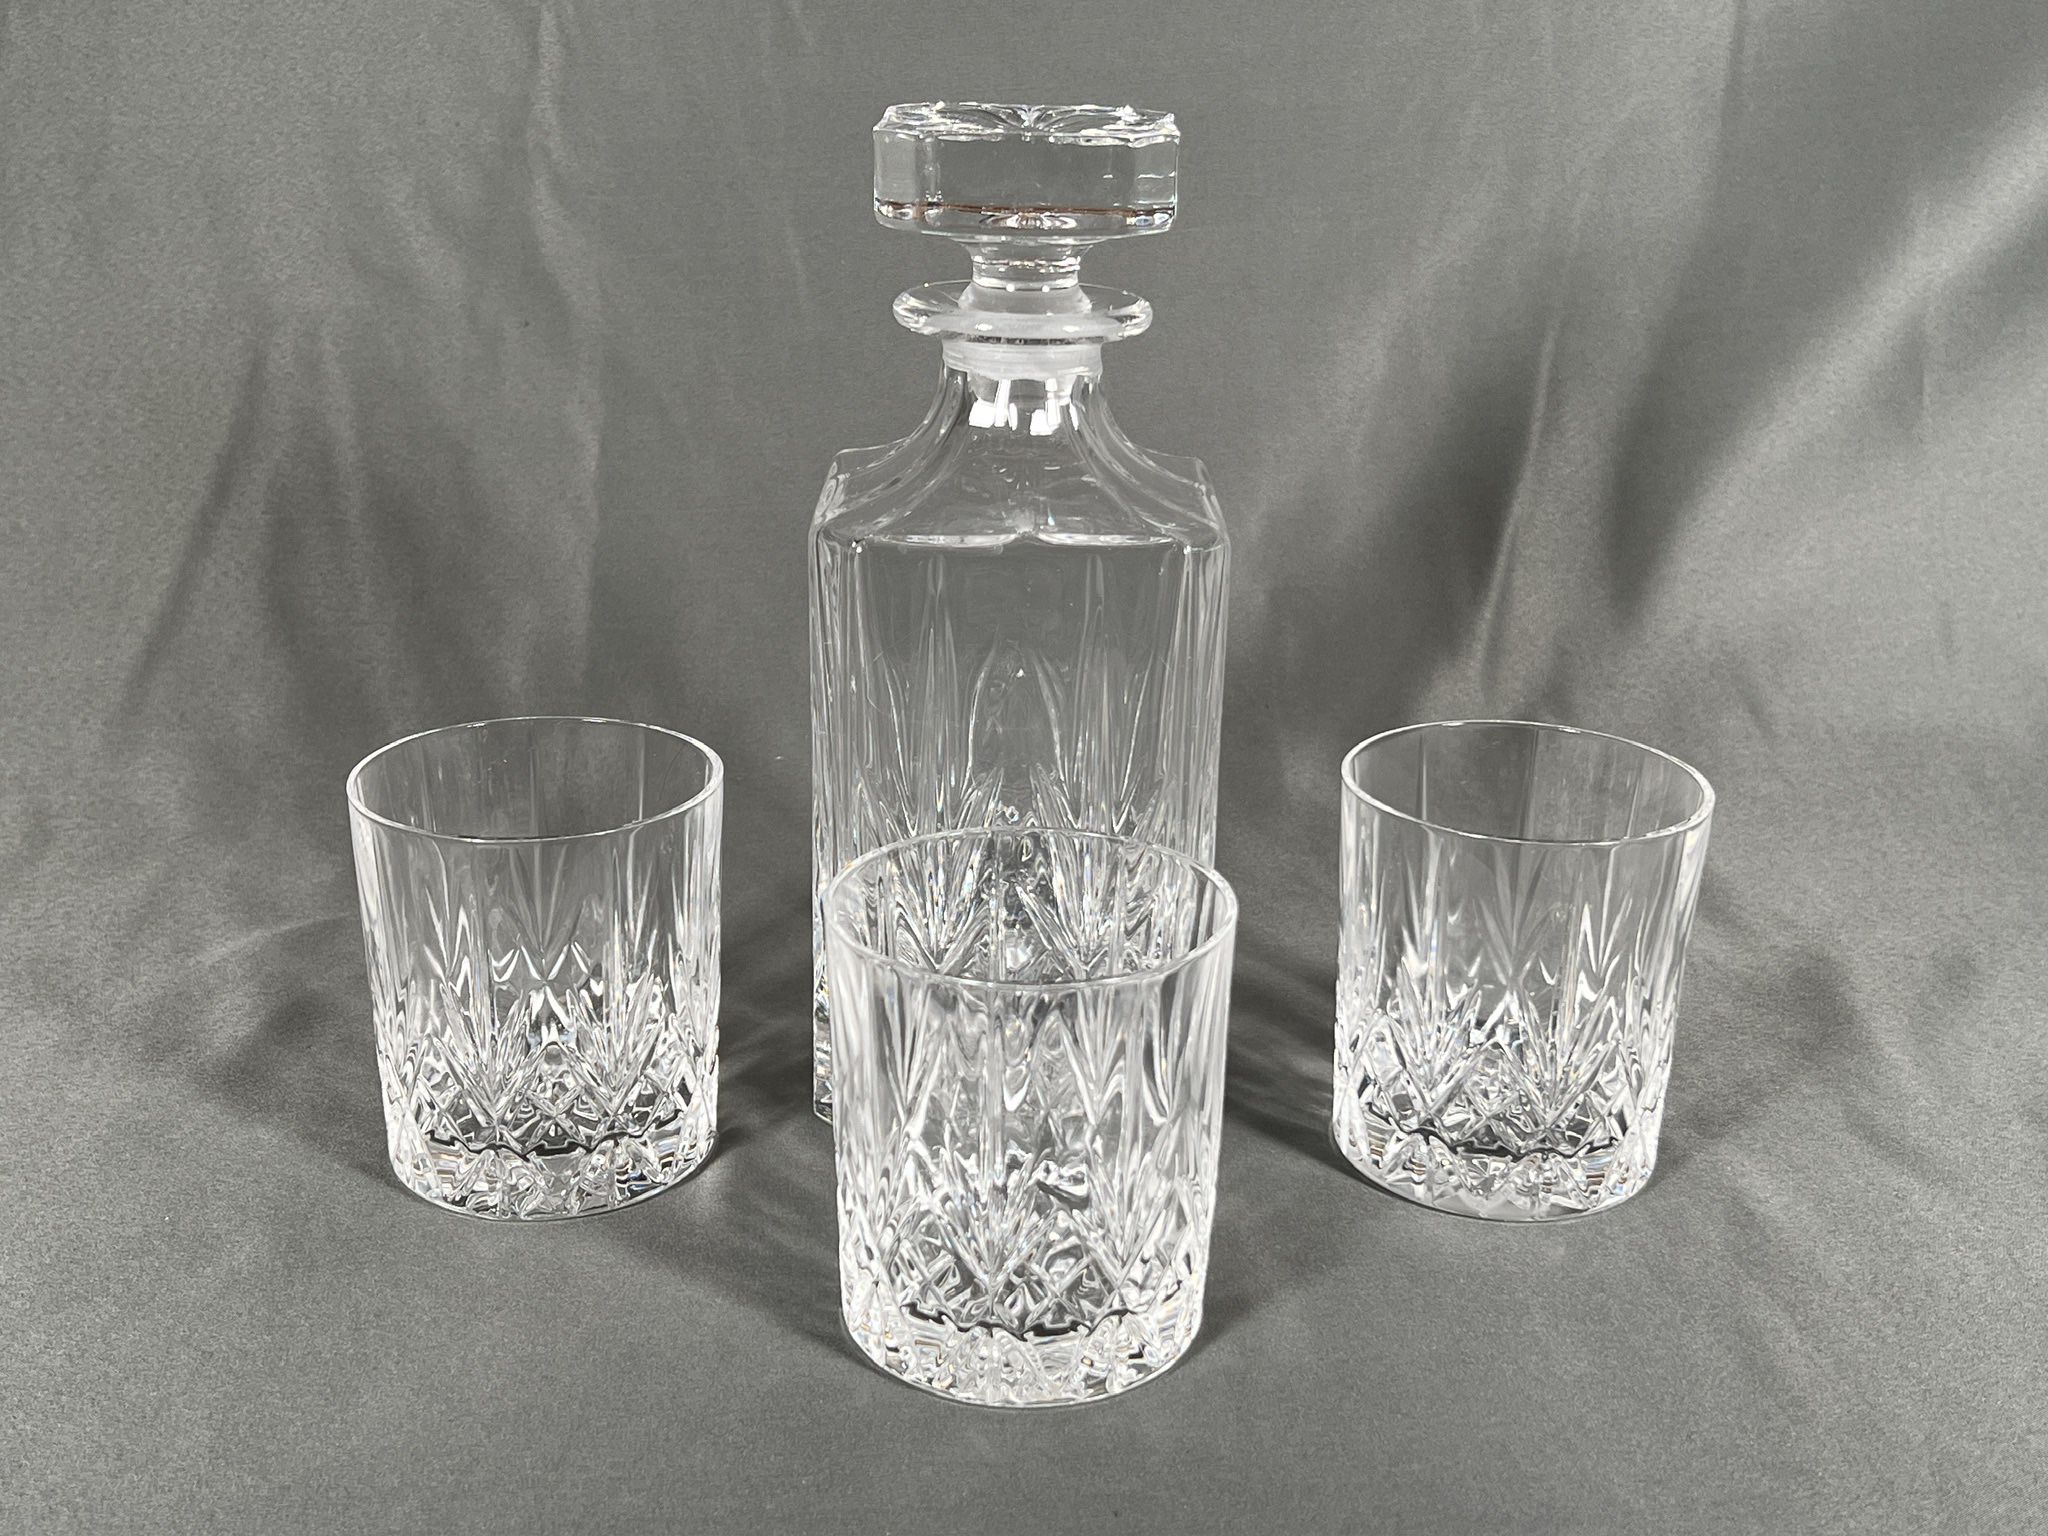 Whiskey Decanter - crystal